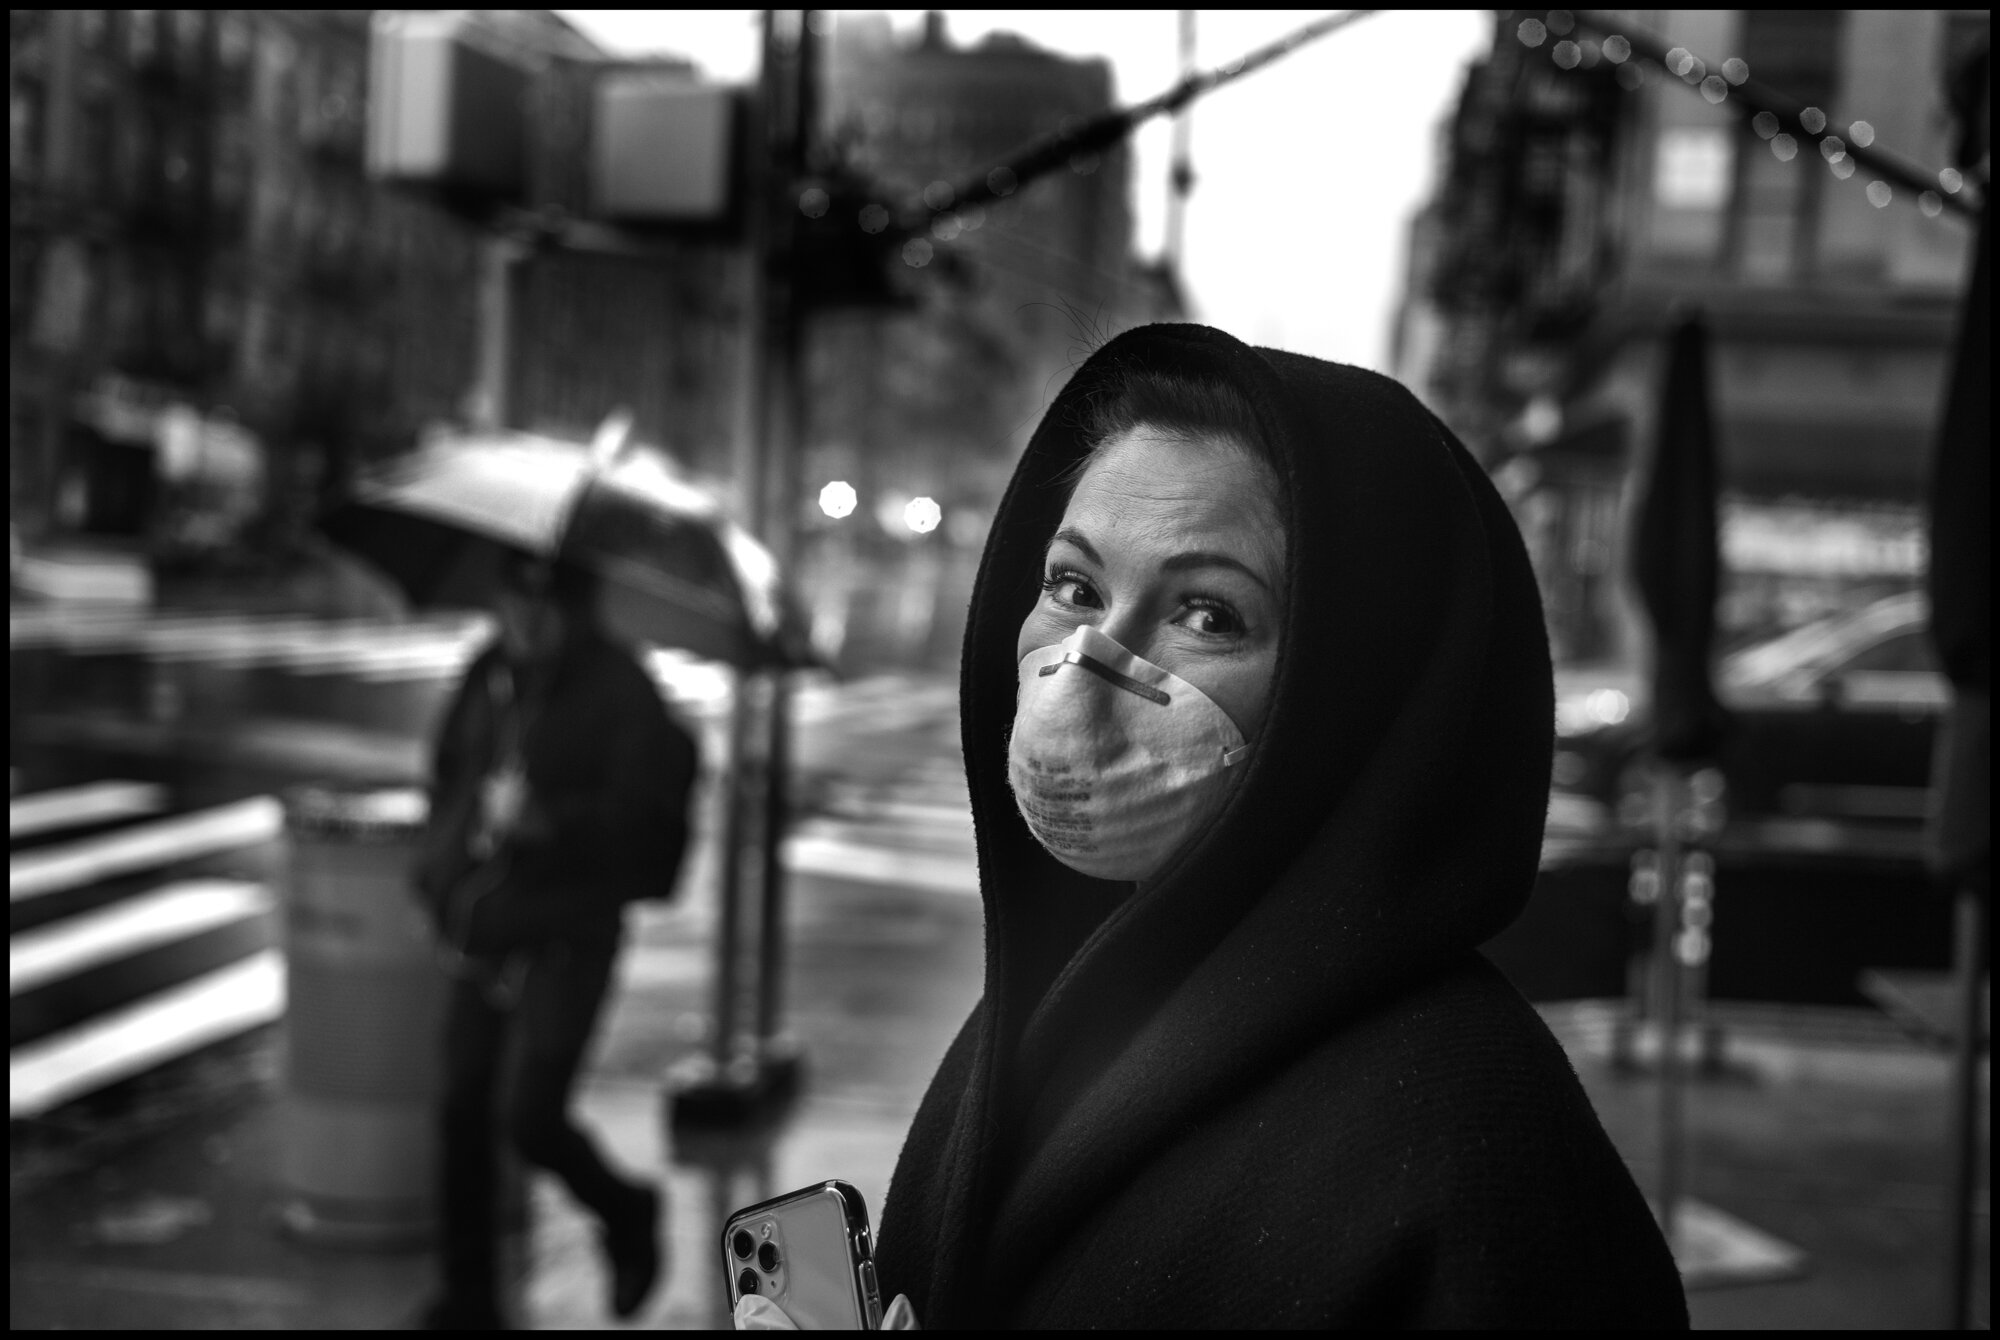  Natalia, originally from Odessa, in the Ukraine, stands on the sidewalk in the rain at 83rdand Columbus.  March 23, 2020. © Peter Turnley.  ID# 02-002 